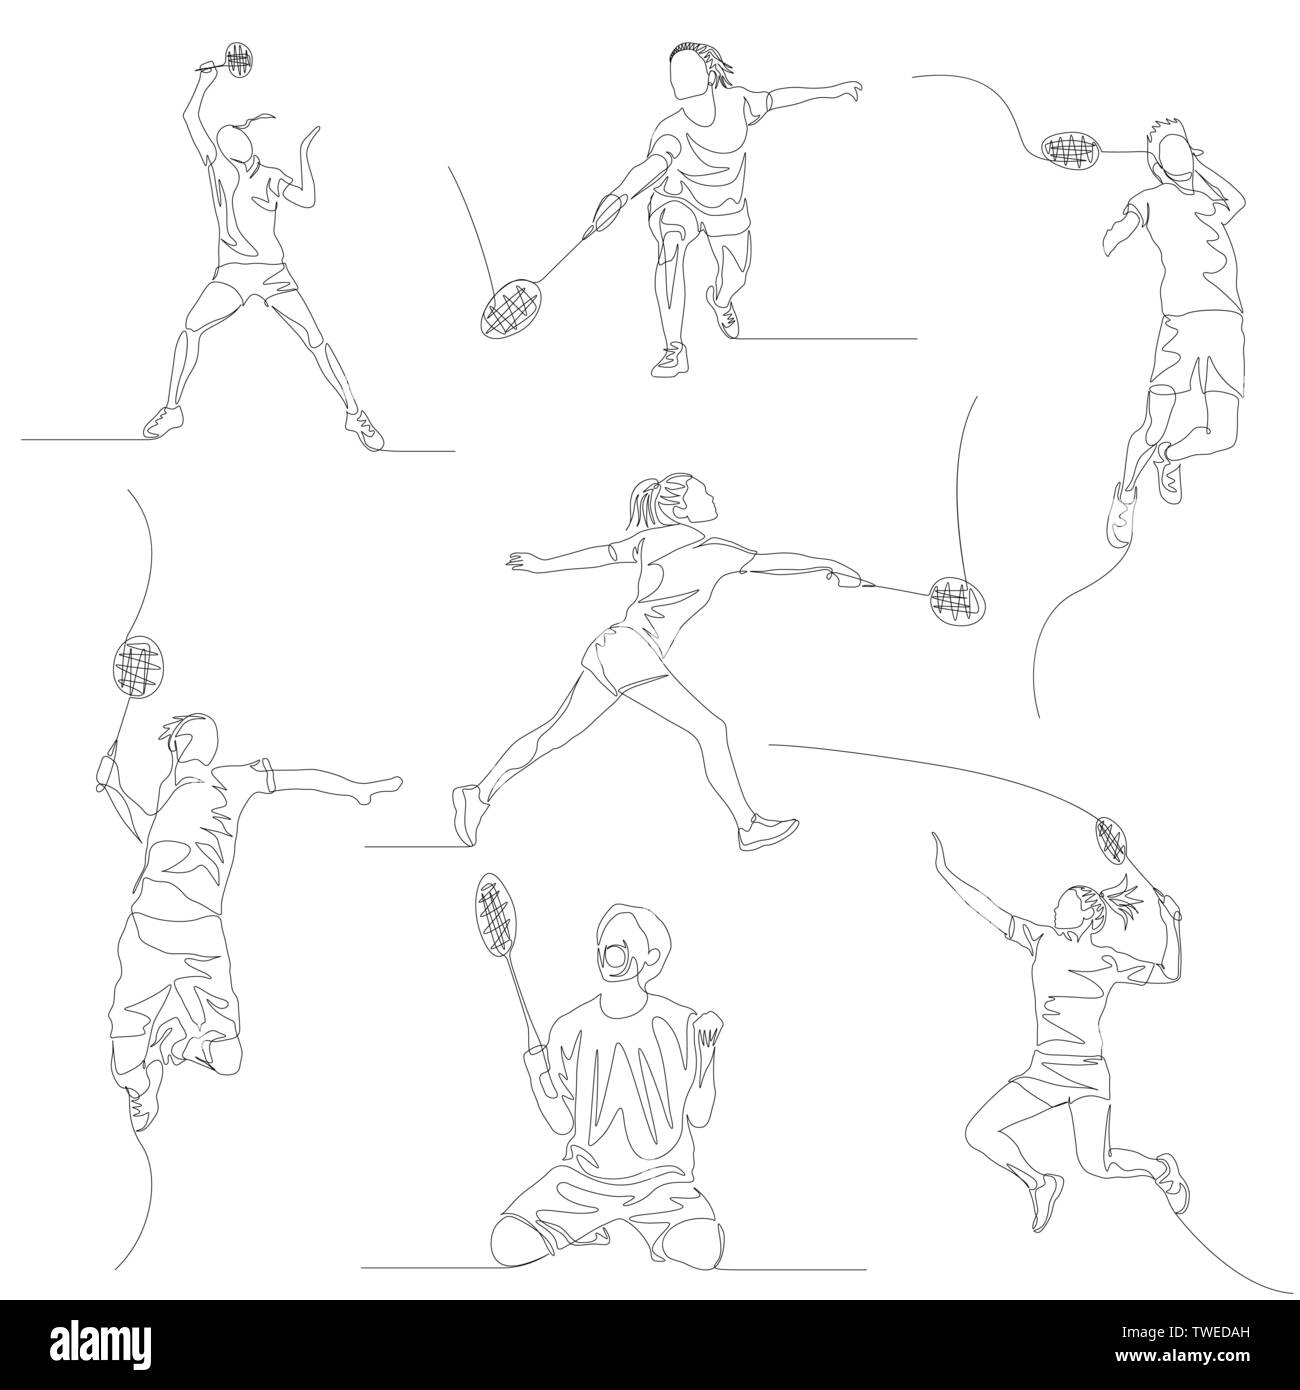 Olympics Coloring Page for Grown Ups  Red Ted Art  Kids Crafts